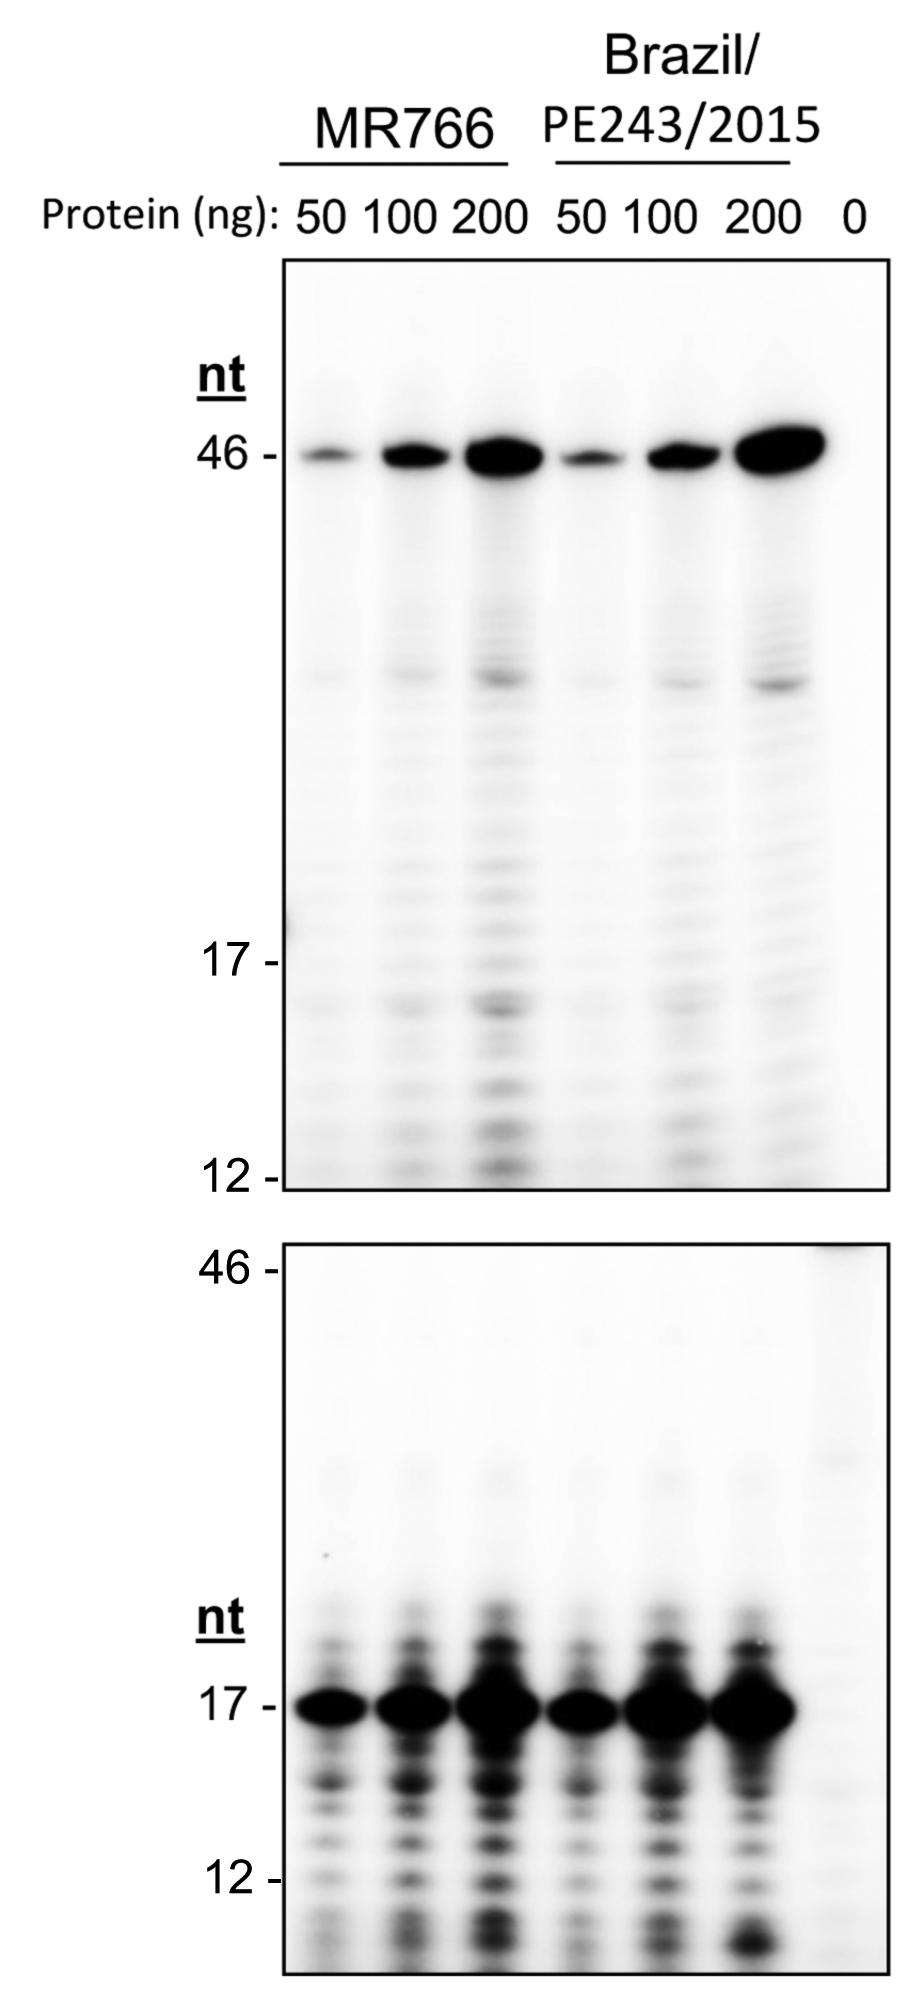 Supplementary Figure 9. Uncropped images of the primer extension and de novo-initiated RNA products synthesized by the NS5 proteins MR766 and Brazil/PE242/2015.